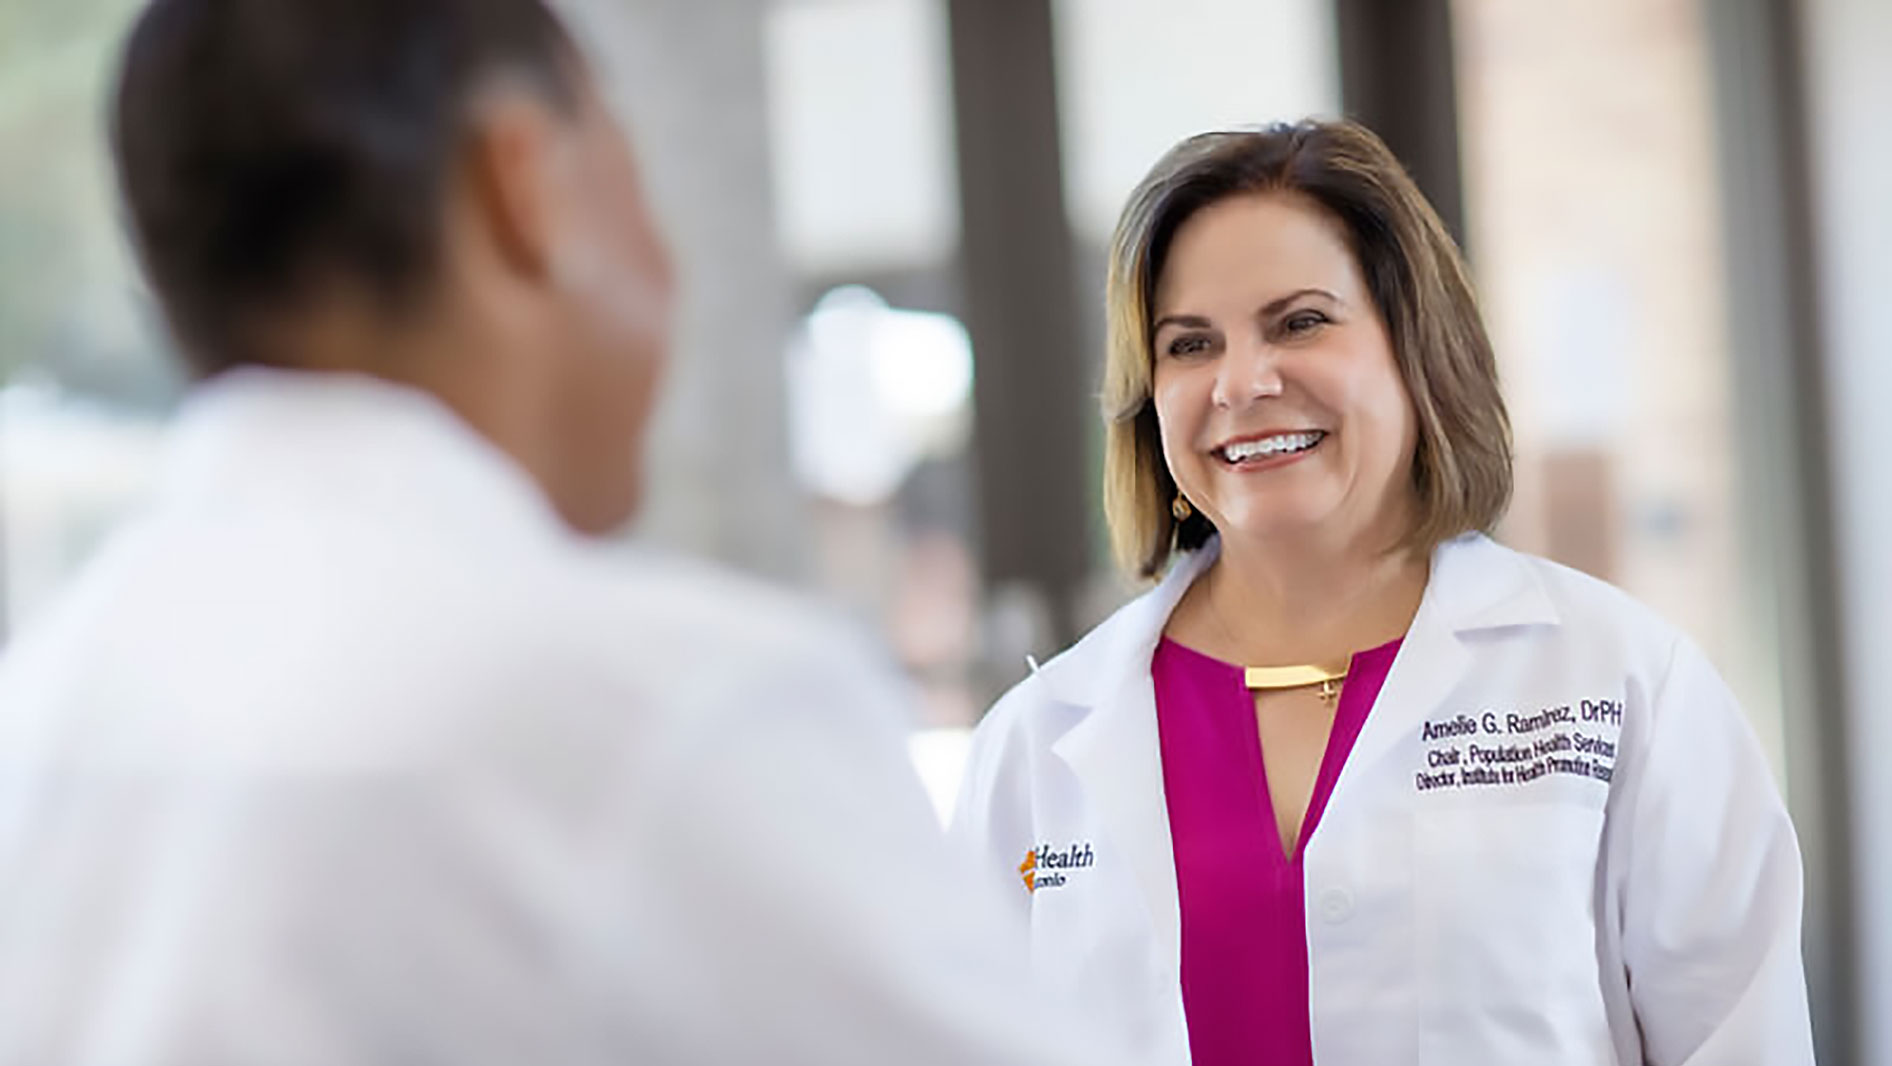 Dr. Amelie Ramirez with the University of Texas Health in San Antonio, Texas and Mays Cancer Center